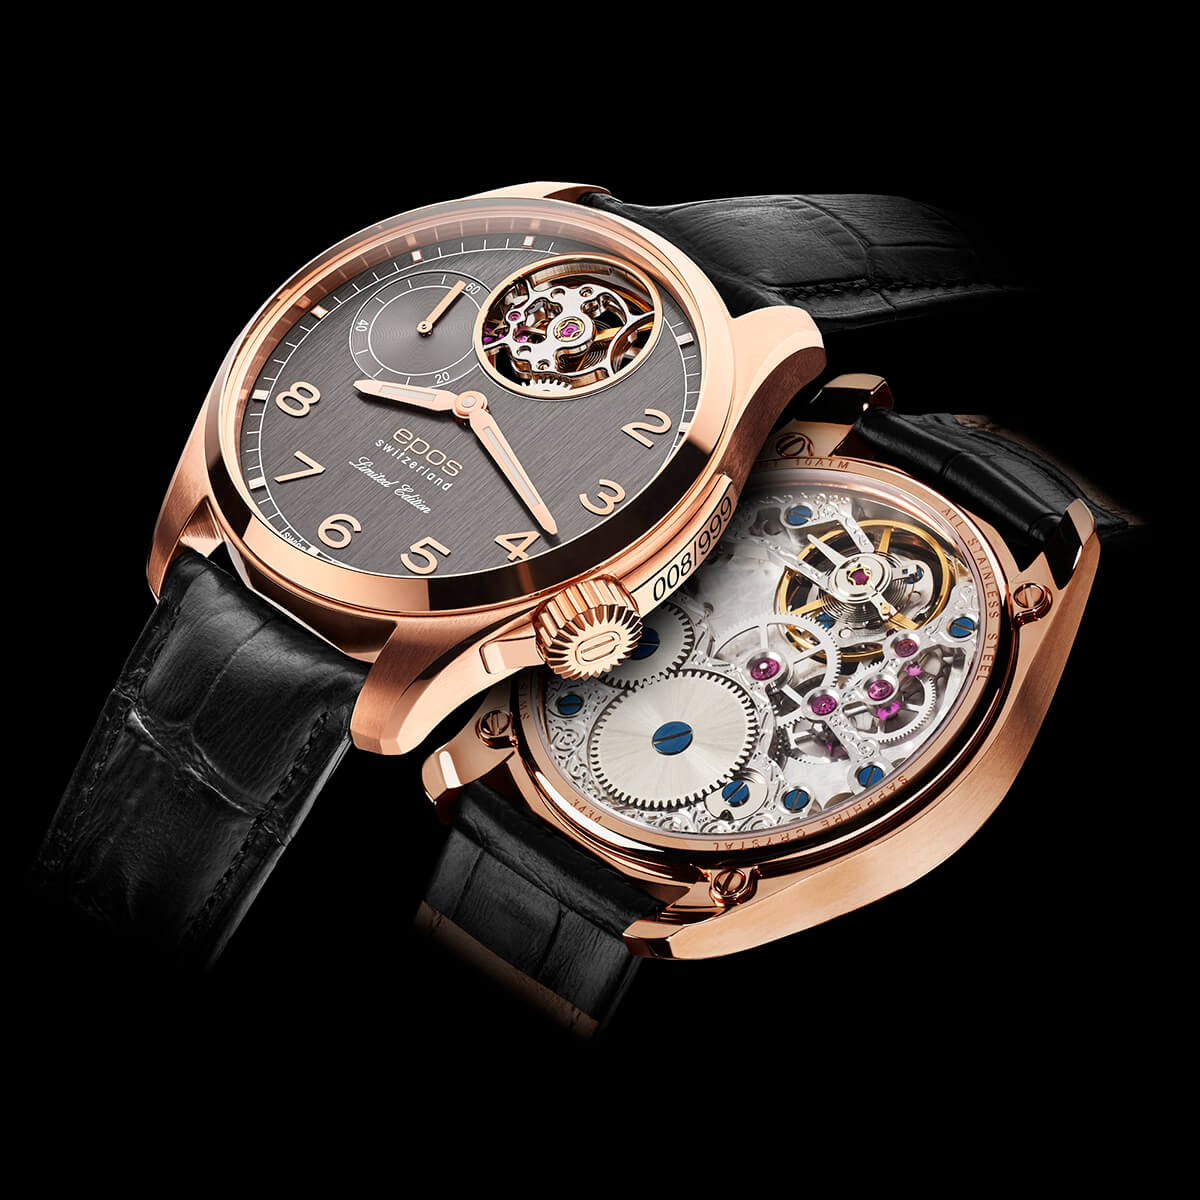 EPOS PASSION 3434 Limited Edition Hand-Wound Half-Skeletonised Elegant Dress Watch 3434.183.24.34.25 - Wilson Watches 